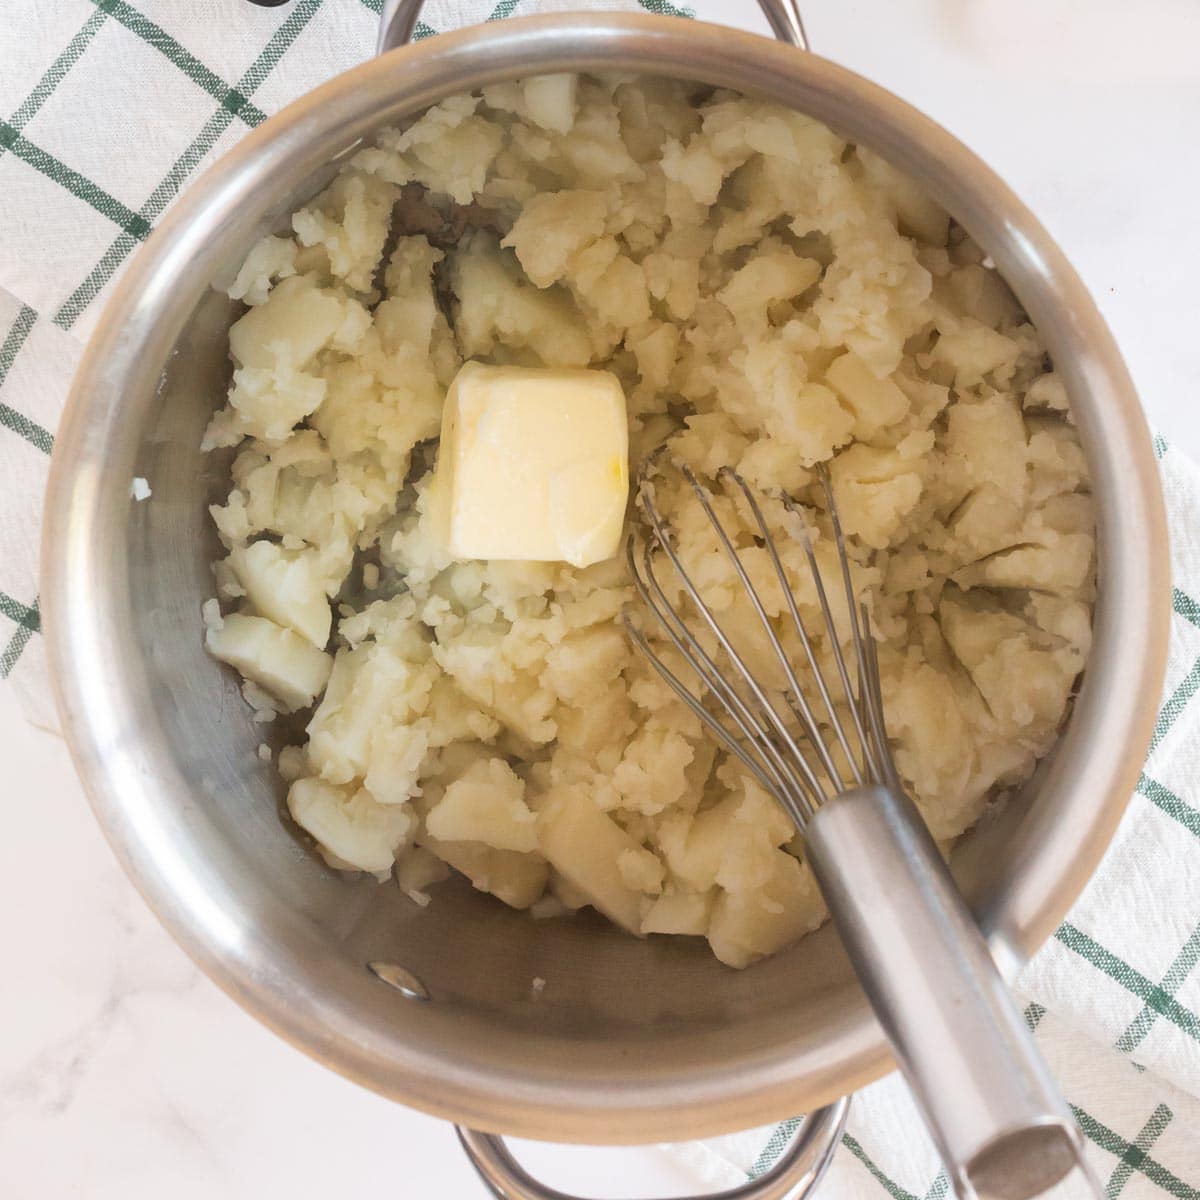 Metal pot with mashed potatoes, a metal whisk, and a cube of butter